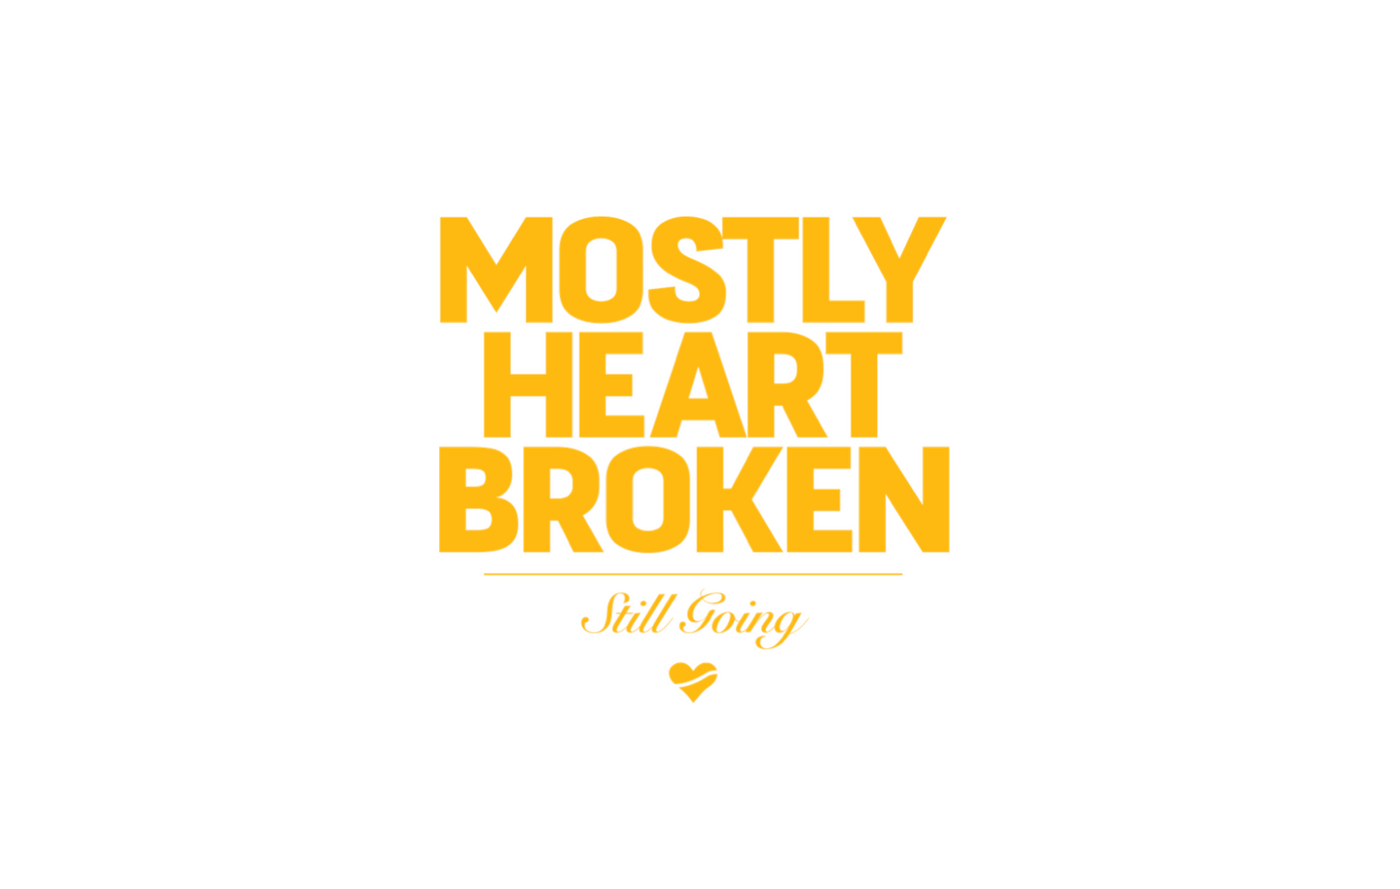 Mostly Heartbroken, Still Going | Thoughts Behind the Campaign